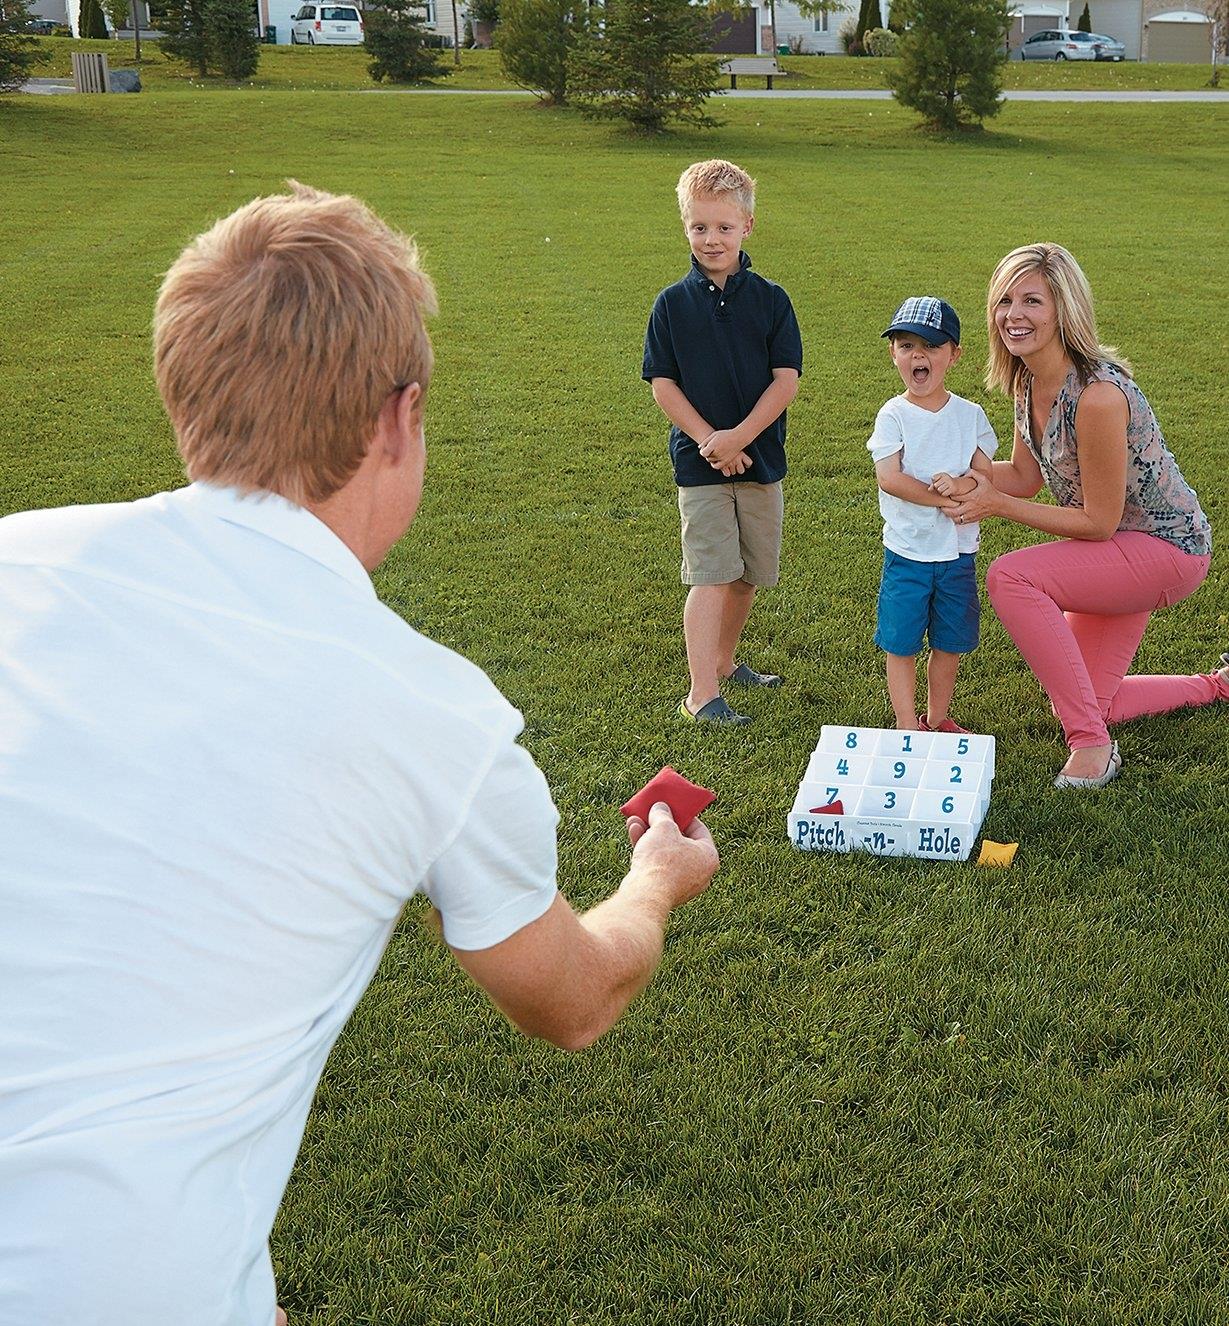 A family plays a game of Pitch-n-Hole at a park